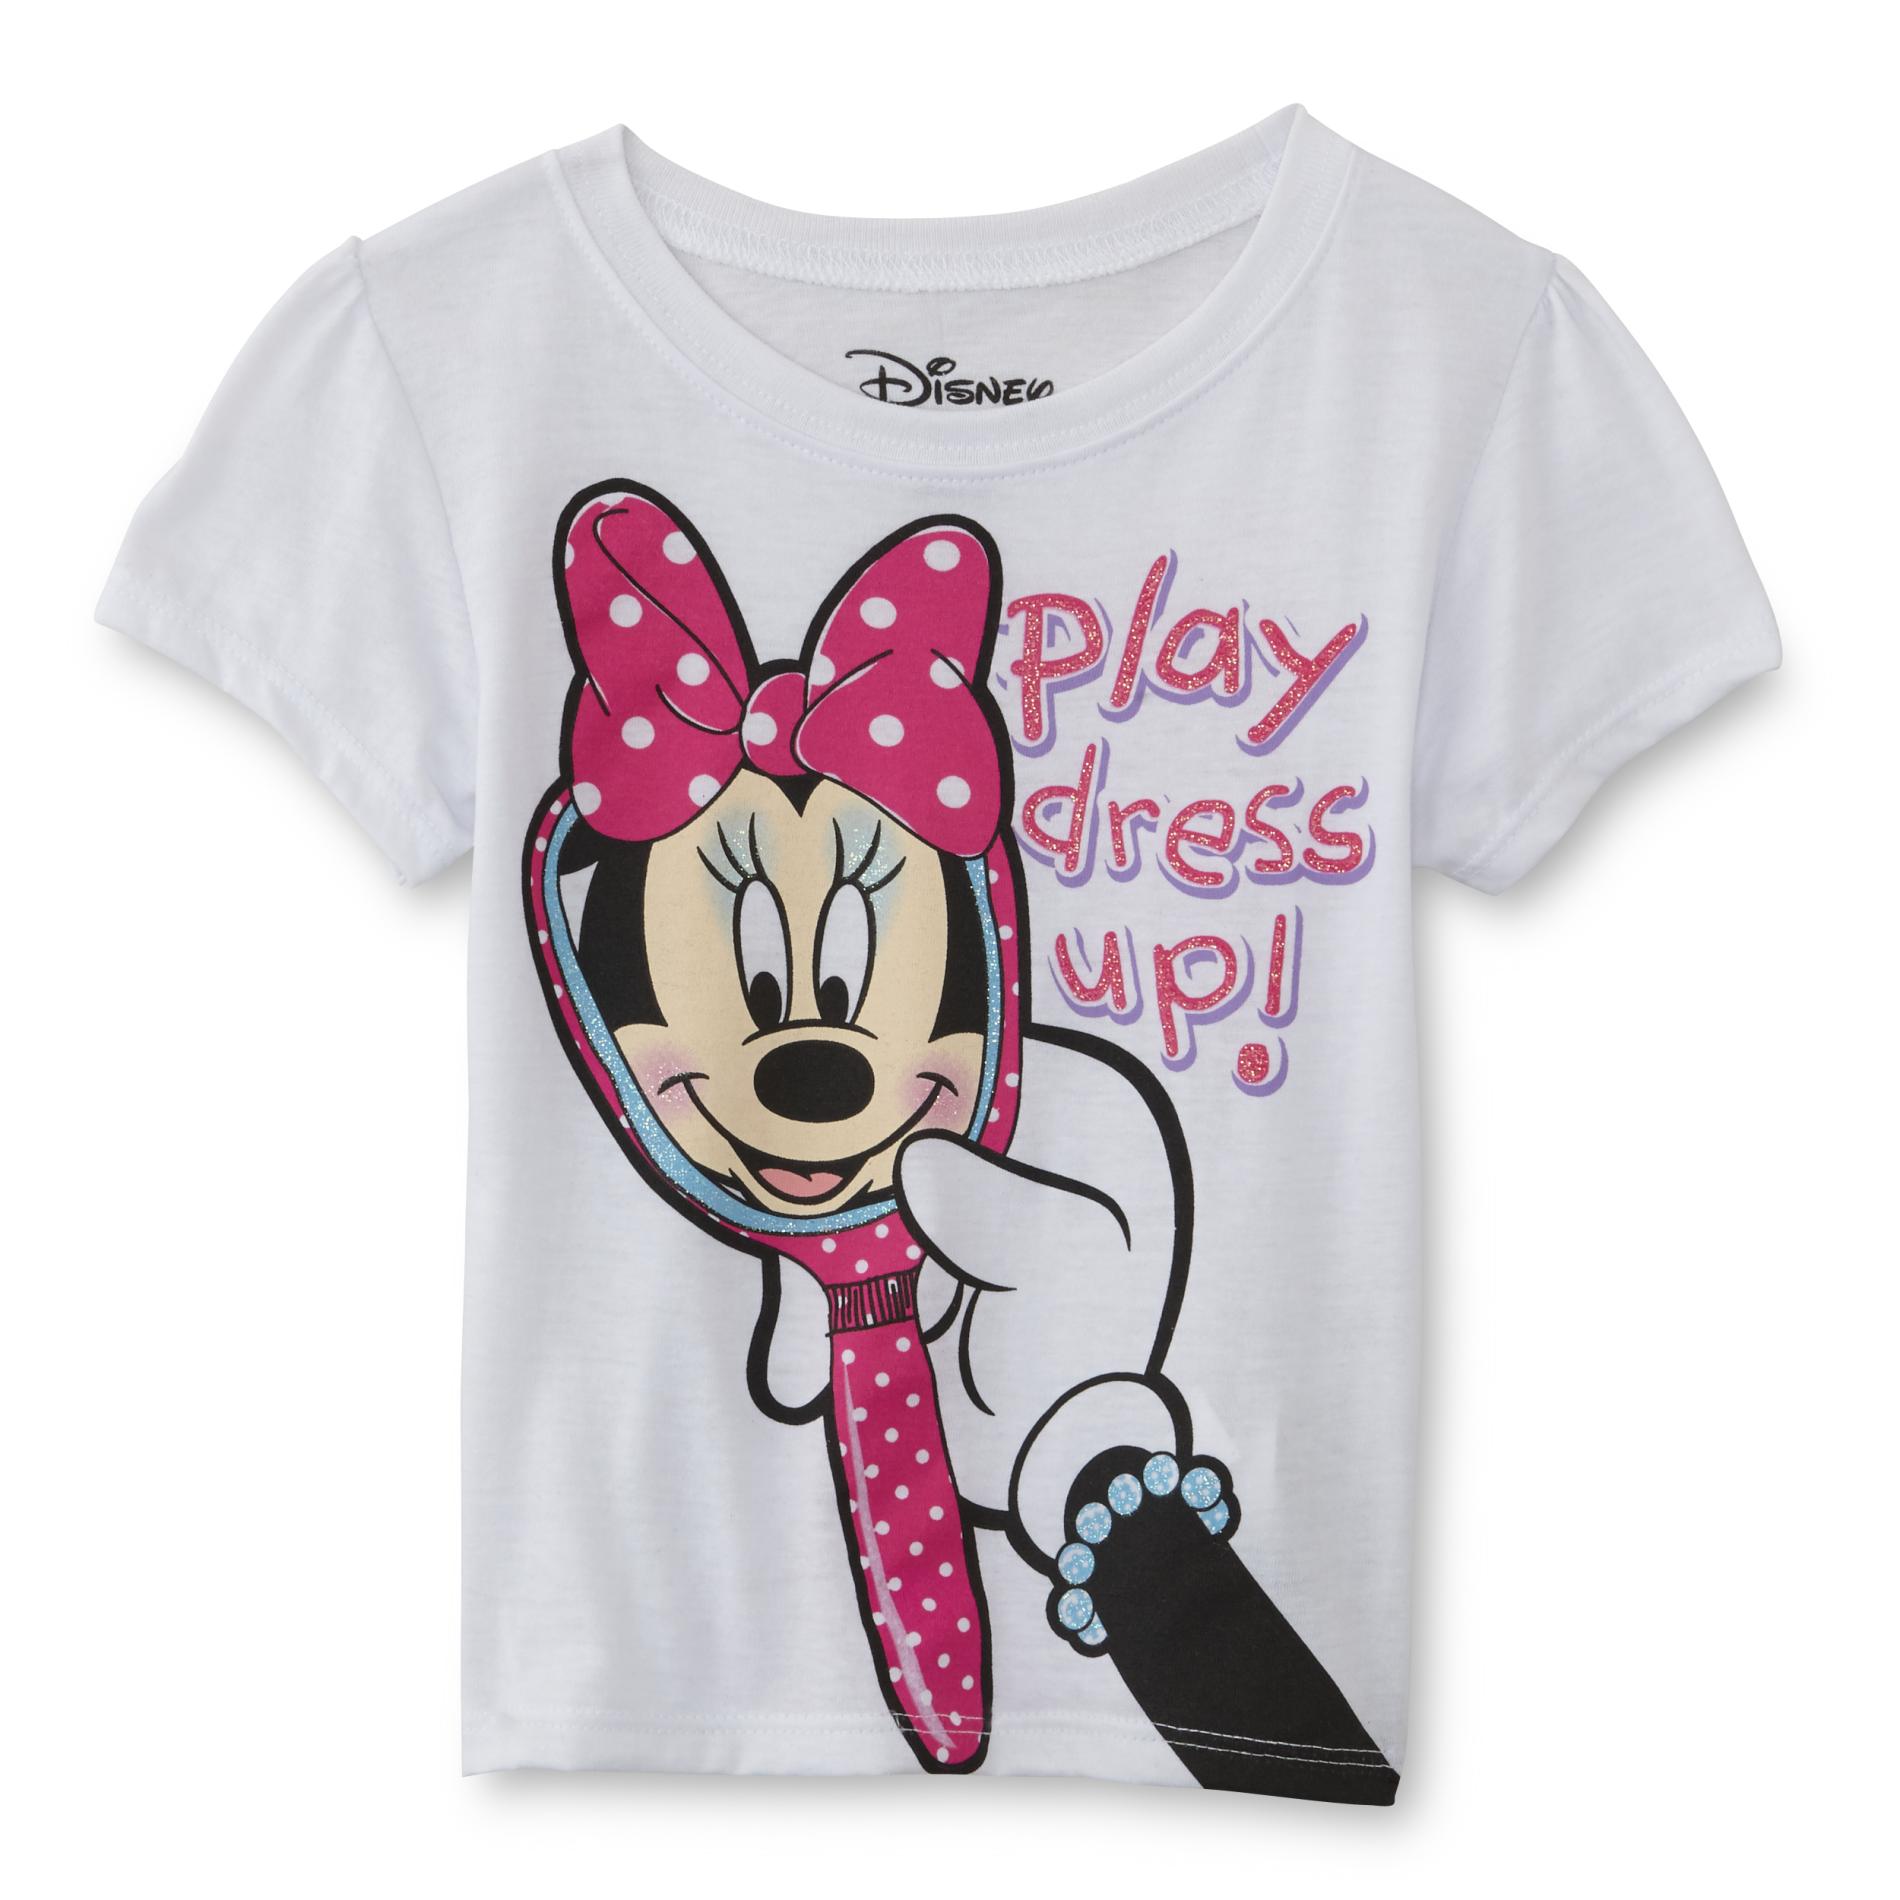 Disney Minnie Mouse Infant & Toddler Girl's T-Shirt - Play Dress Up